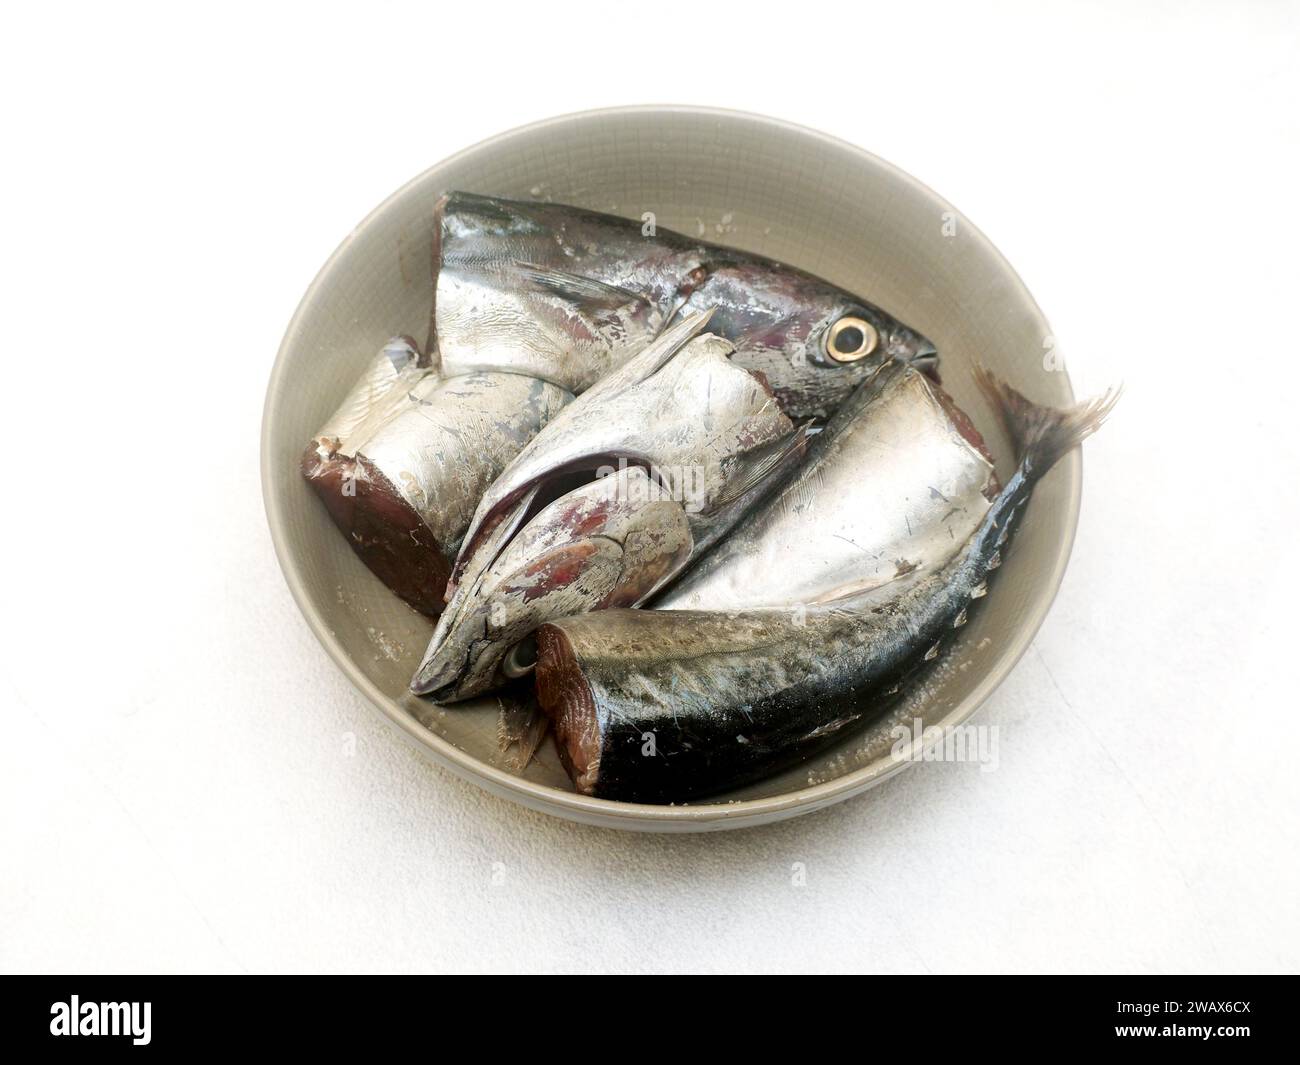 preparing for cooking, cutting mackerel tuna fish in ceramic bowl marinate with salt and pepper Stock Photo